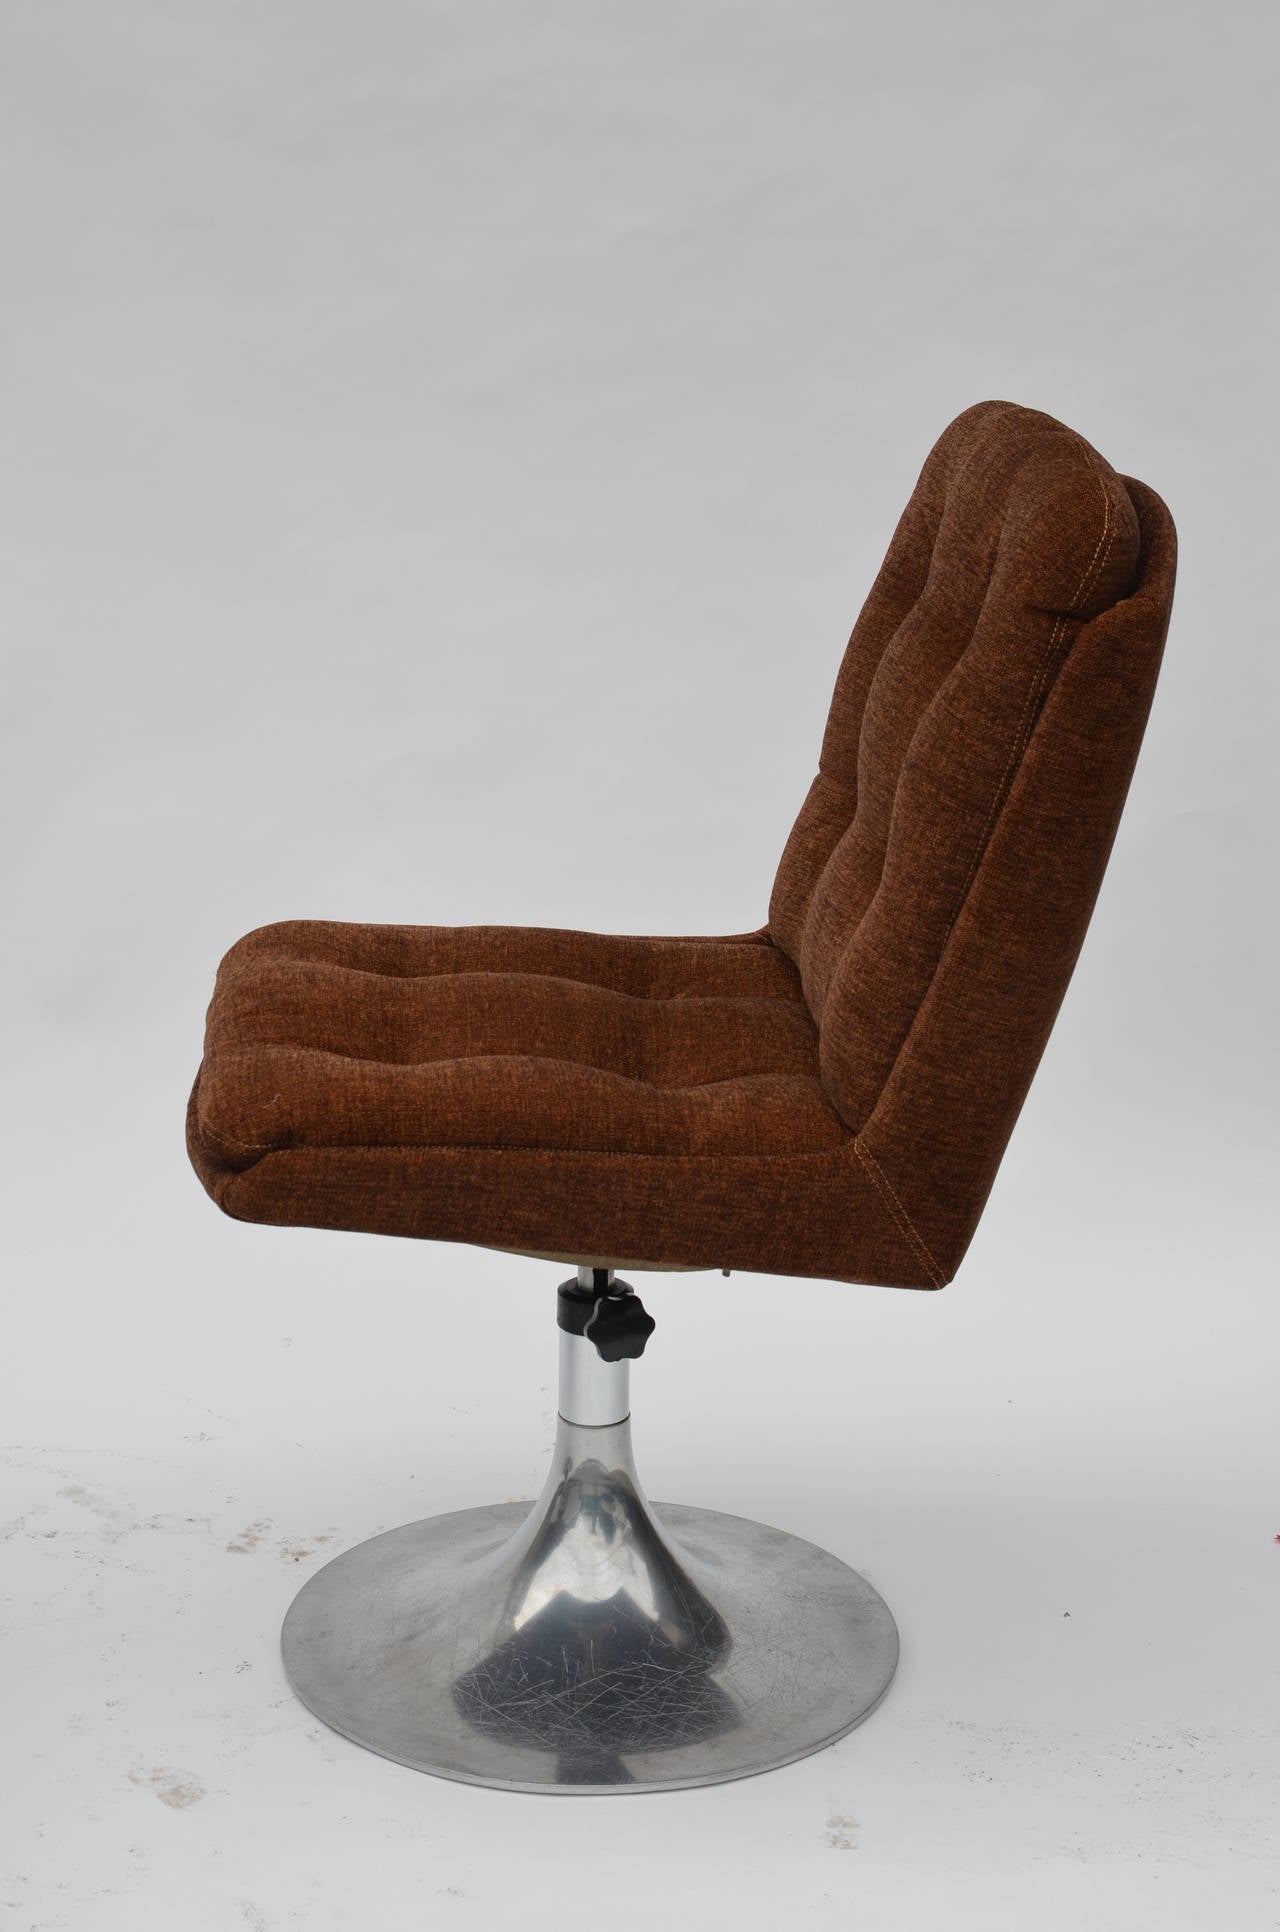 1960s chair styles